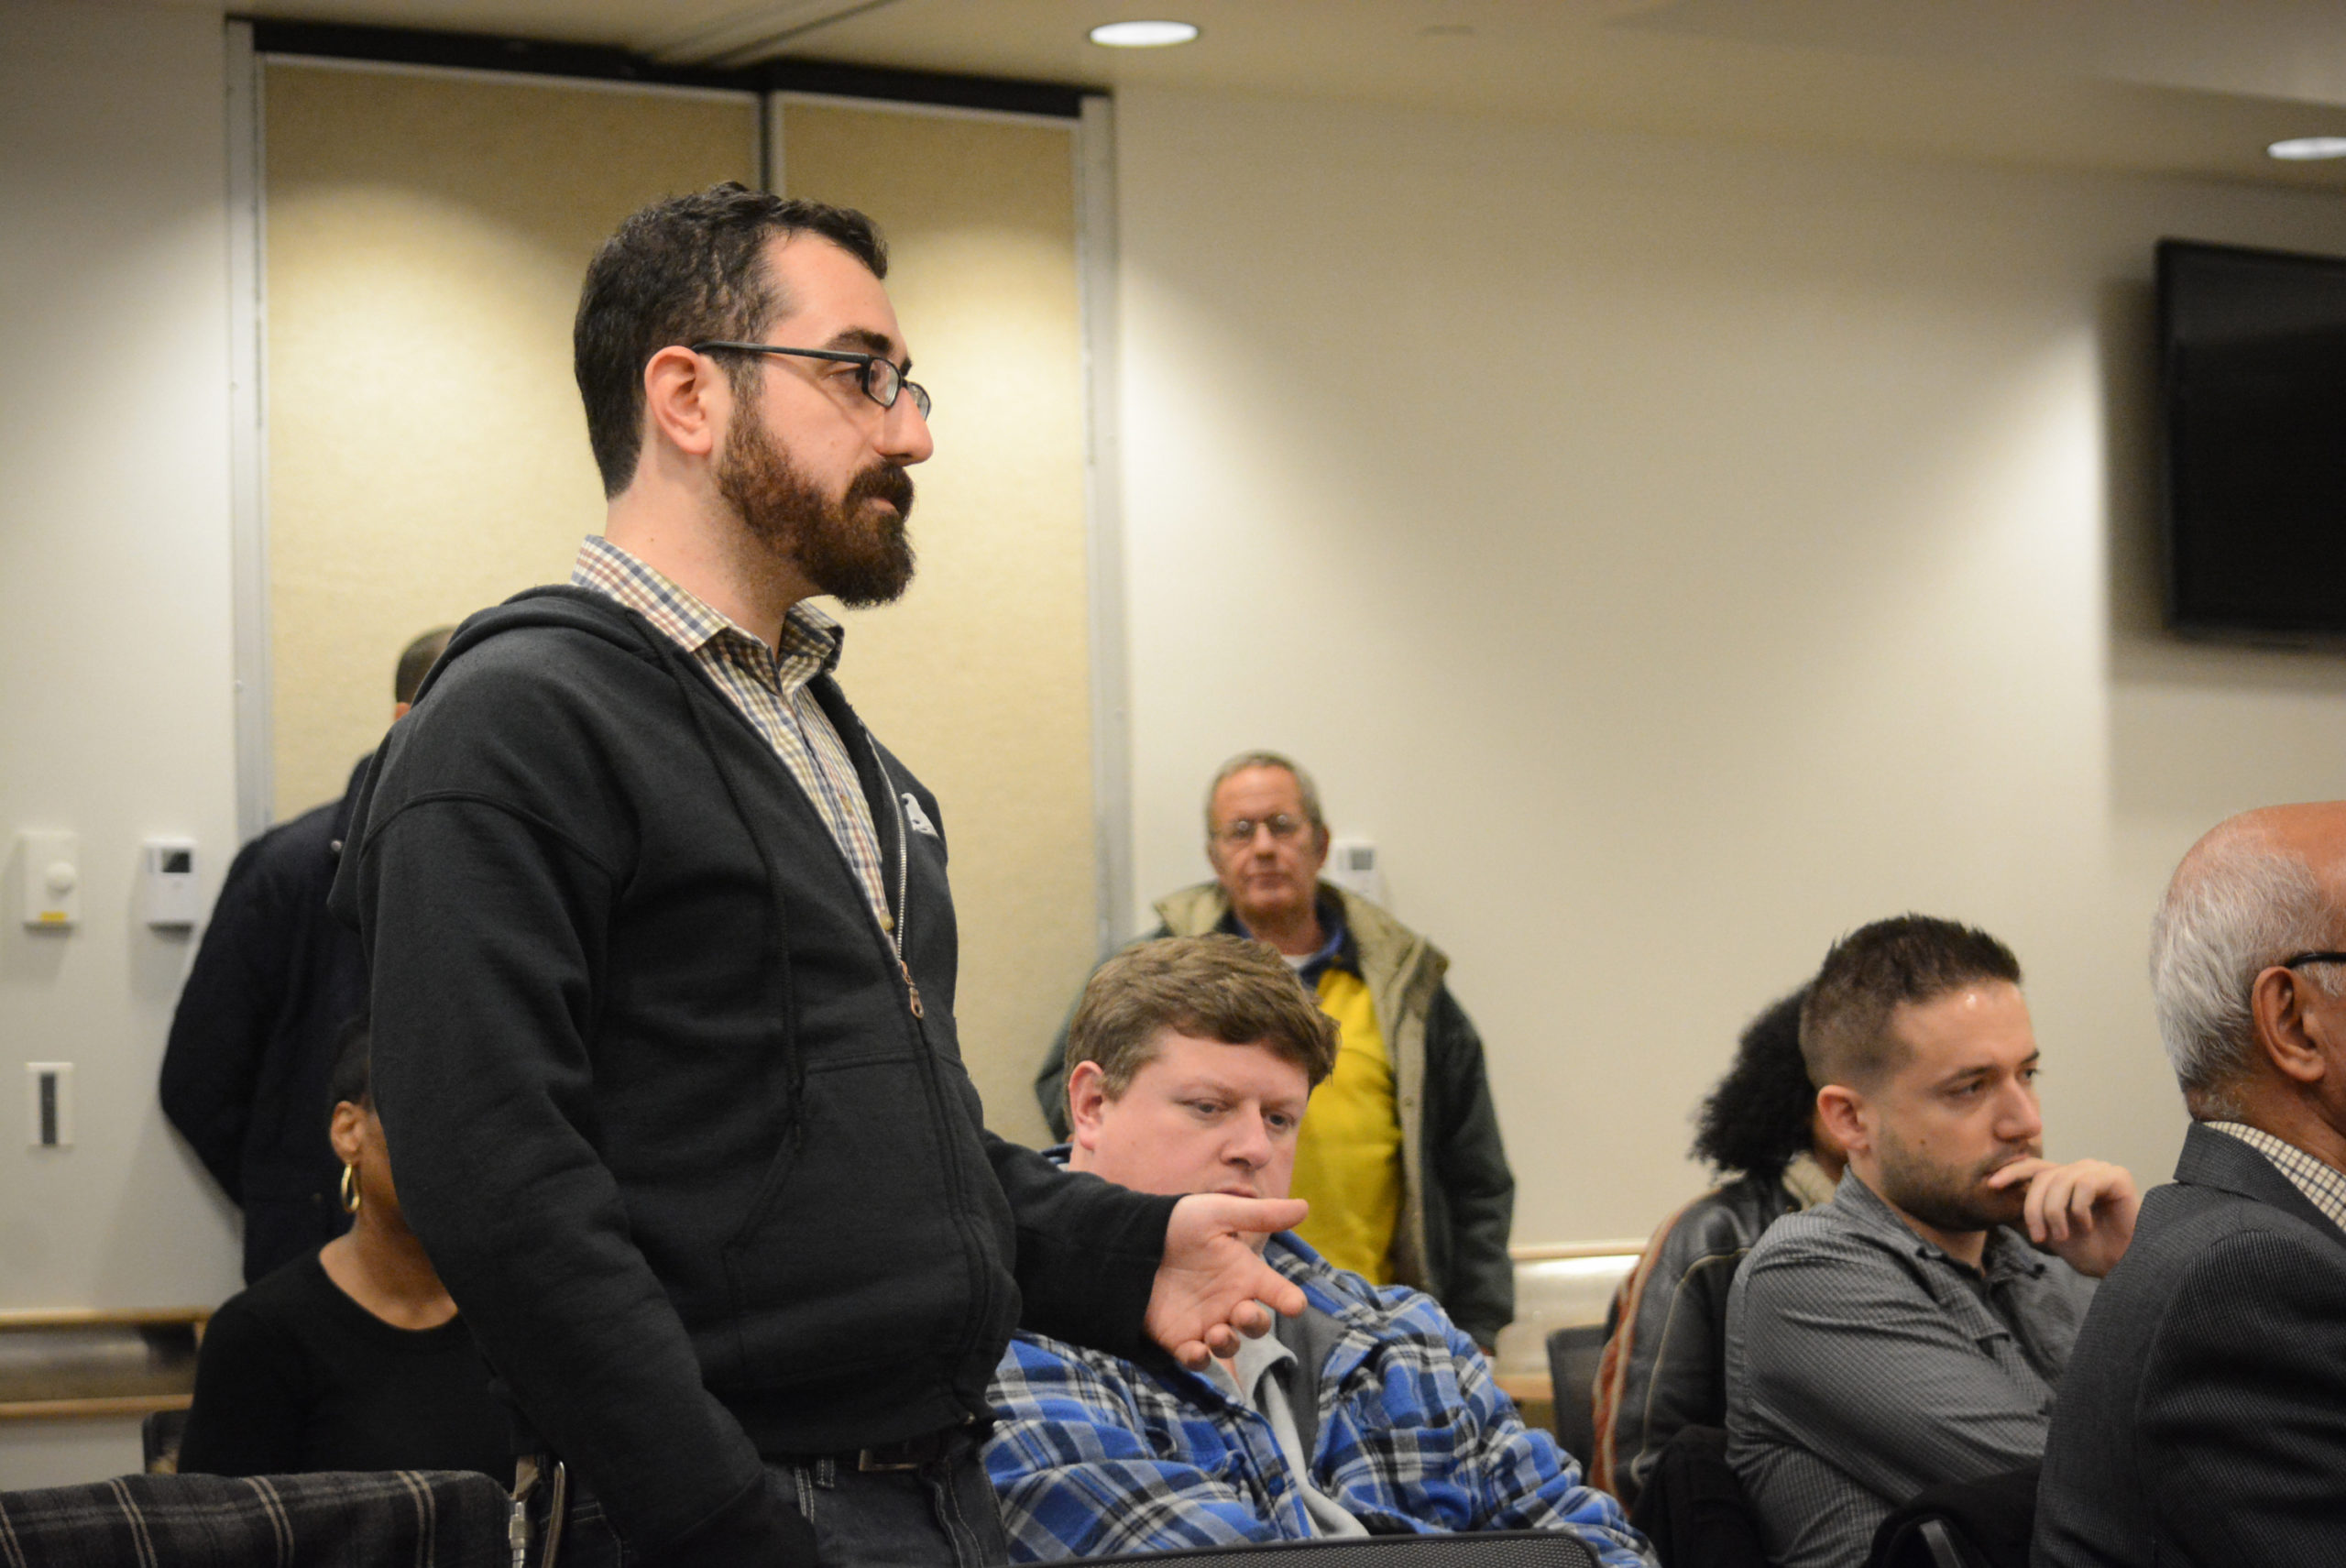 Eliot Friedman, 29, speaks up about issues like healthcare and affordability at the town hall-style forum. (Photo by Janelle Clausen)